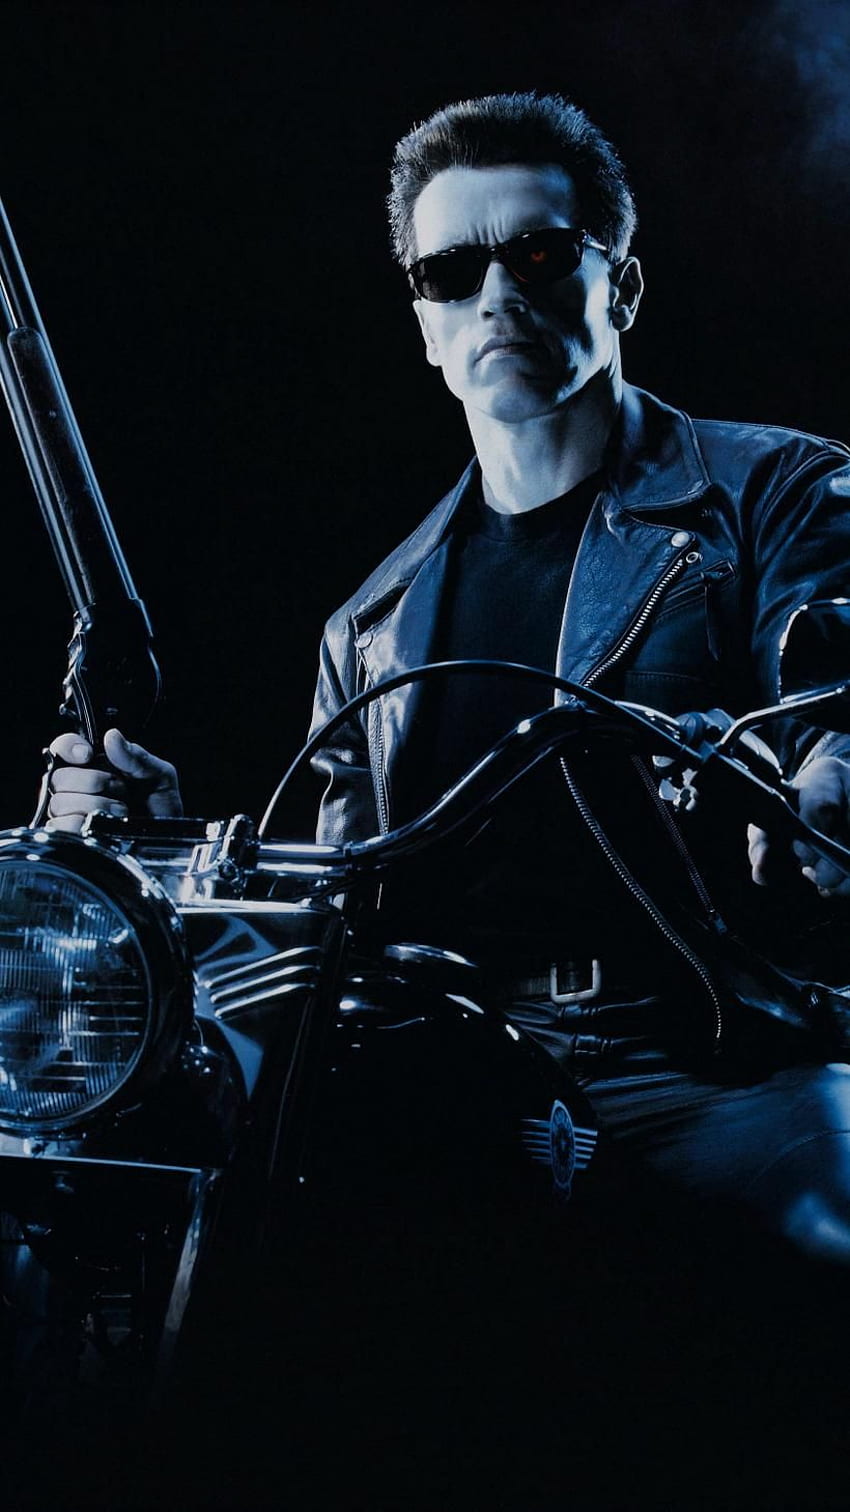 for Terminator 2: Judgment Day (1991). Terminator movies, Terminator, Movie posters, Judgement Day HD phone wallpaper